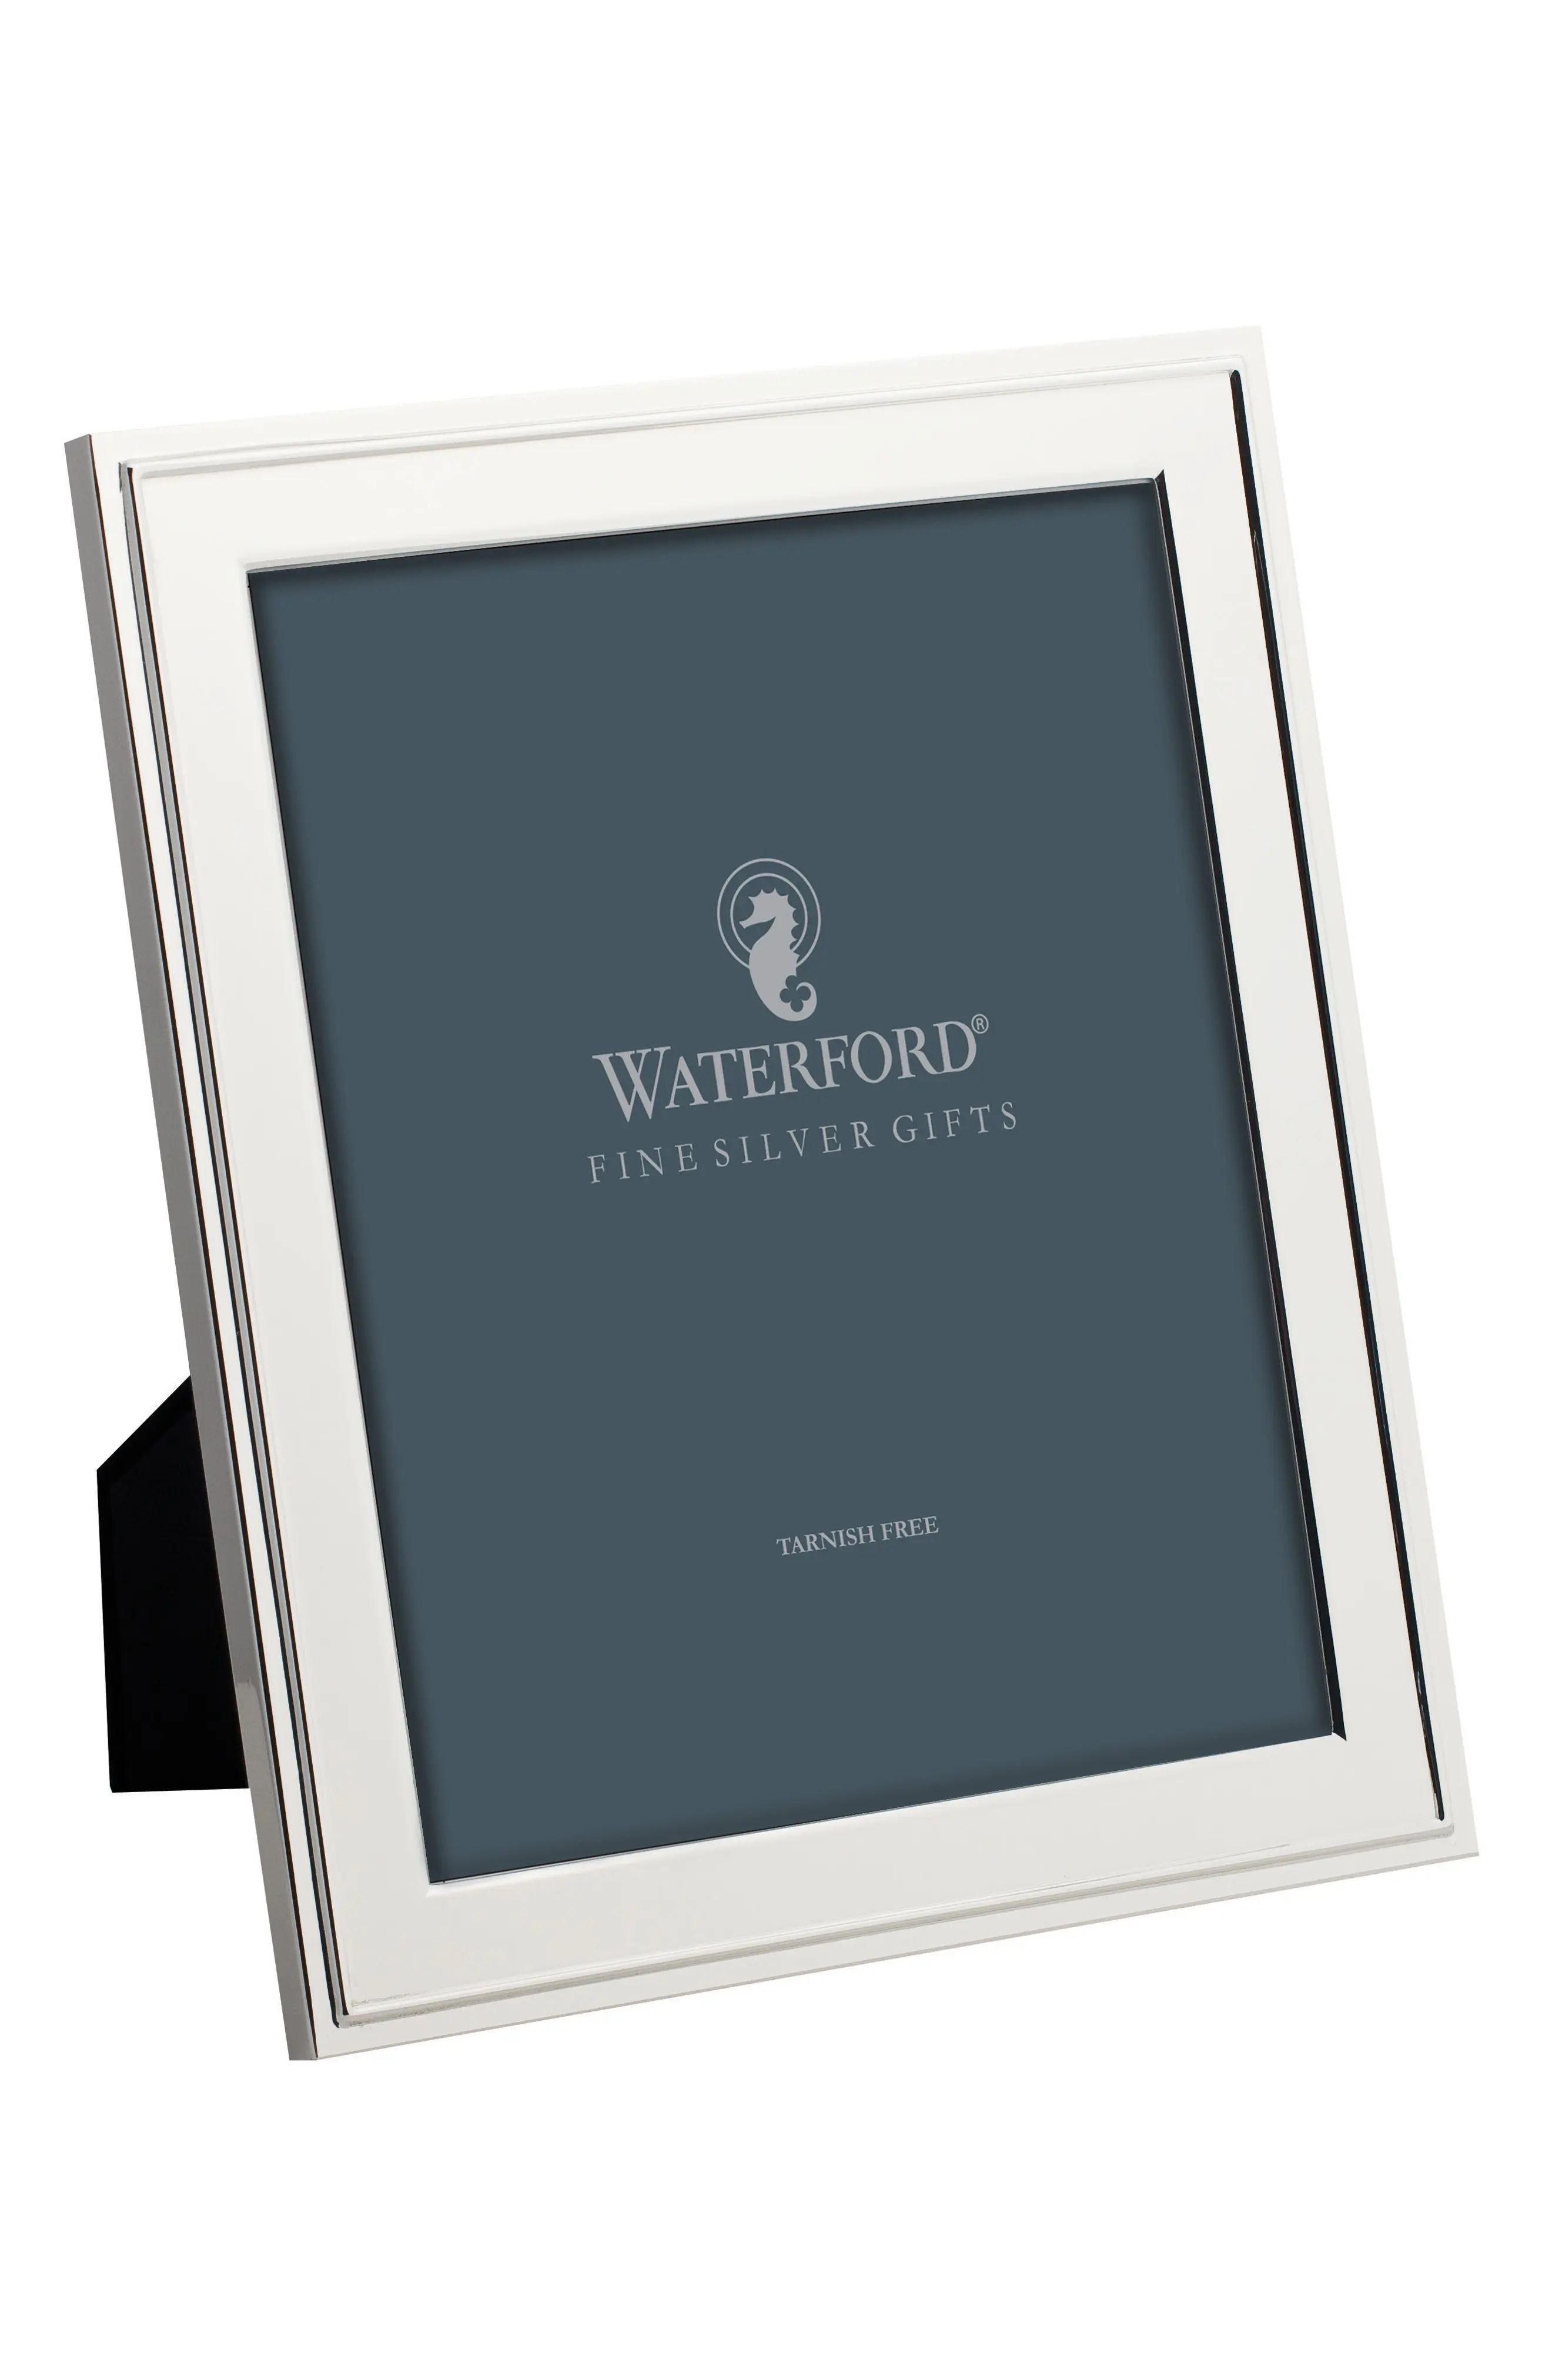 Waterford Classic Picture Frame in Silver at Nordstrom, Size 5X7 | Nordstrom